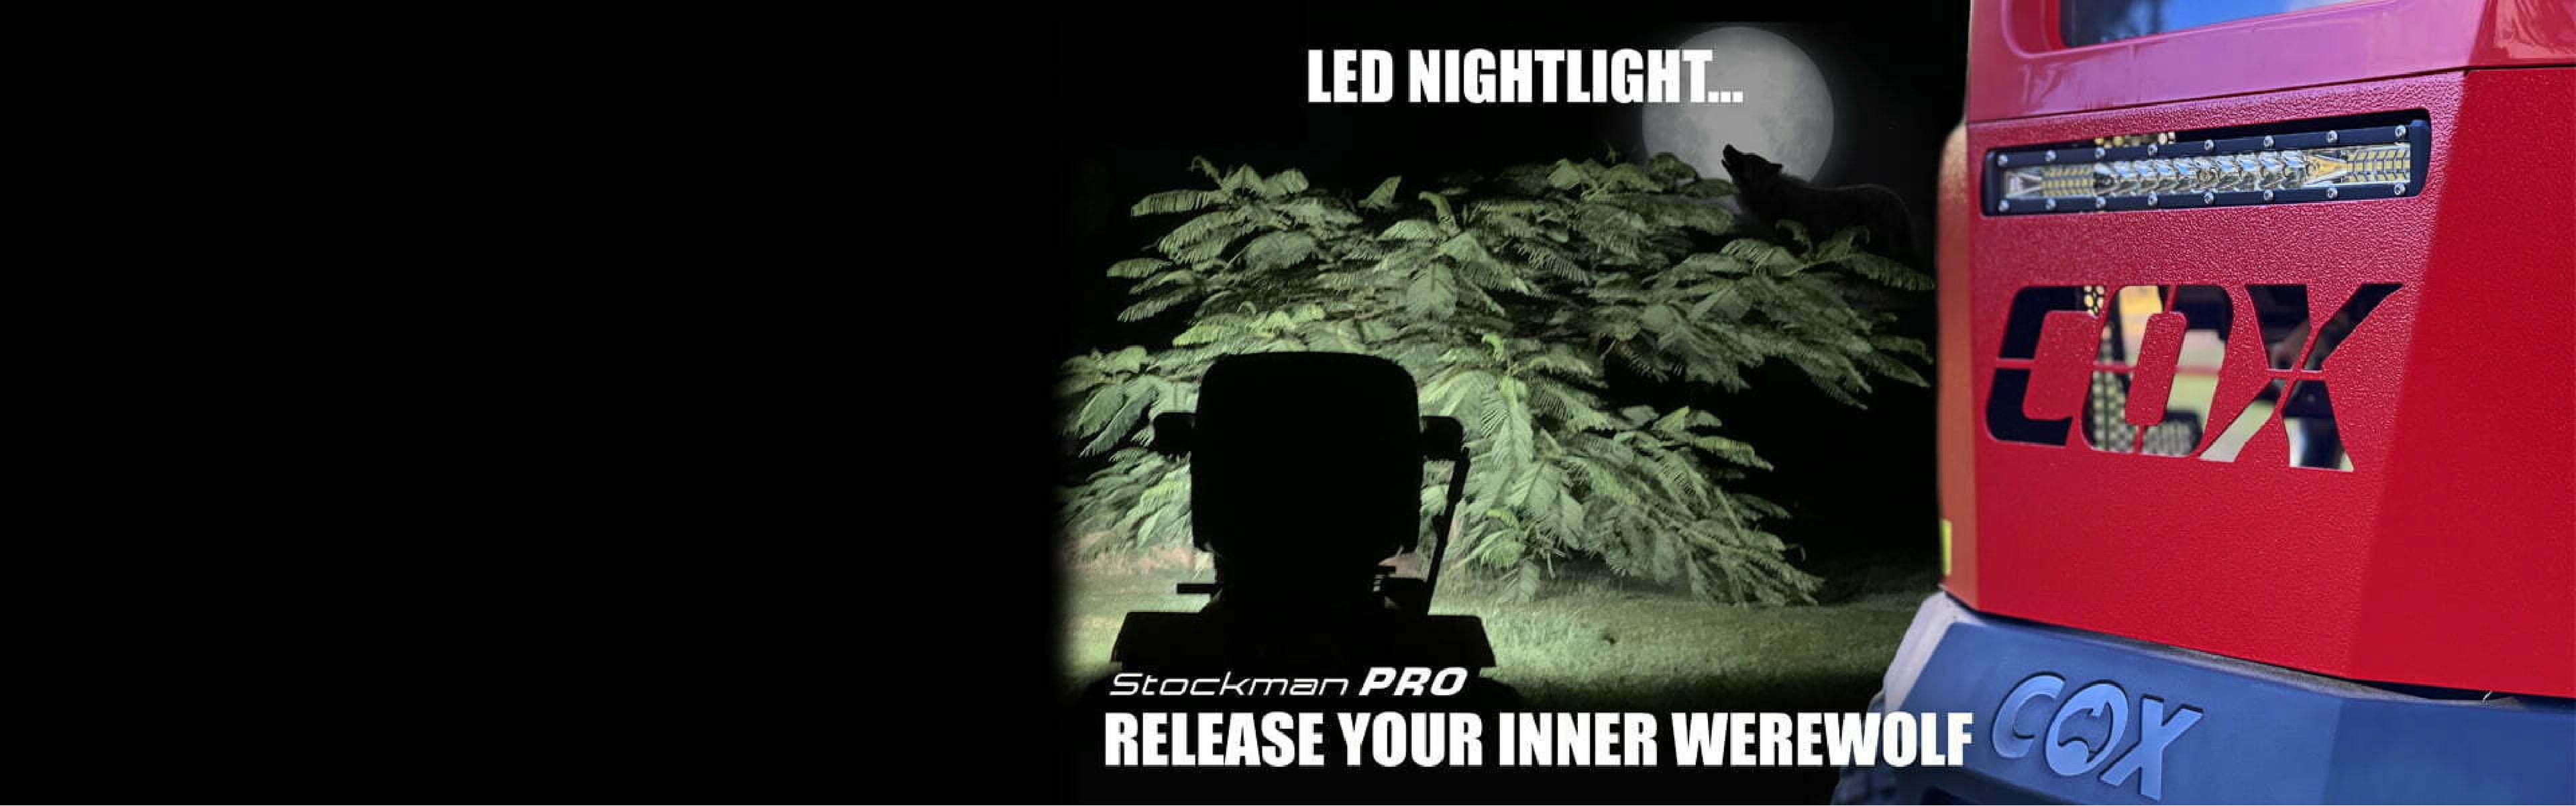 COX Mowers LED nightlight for the Stockman Pro ride on lawn mower image